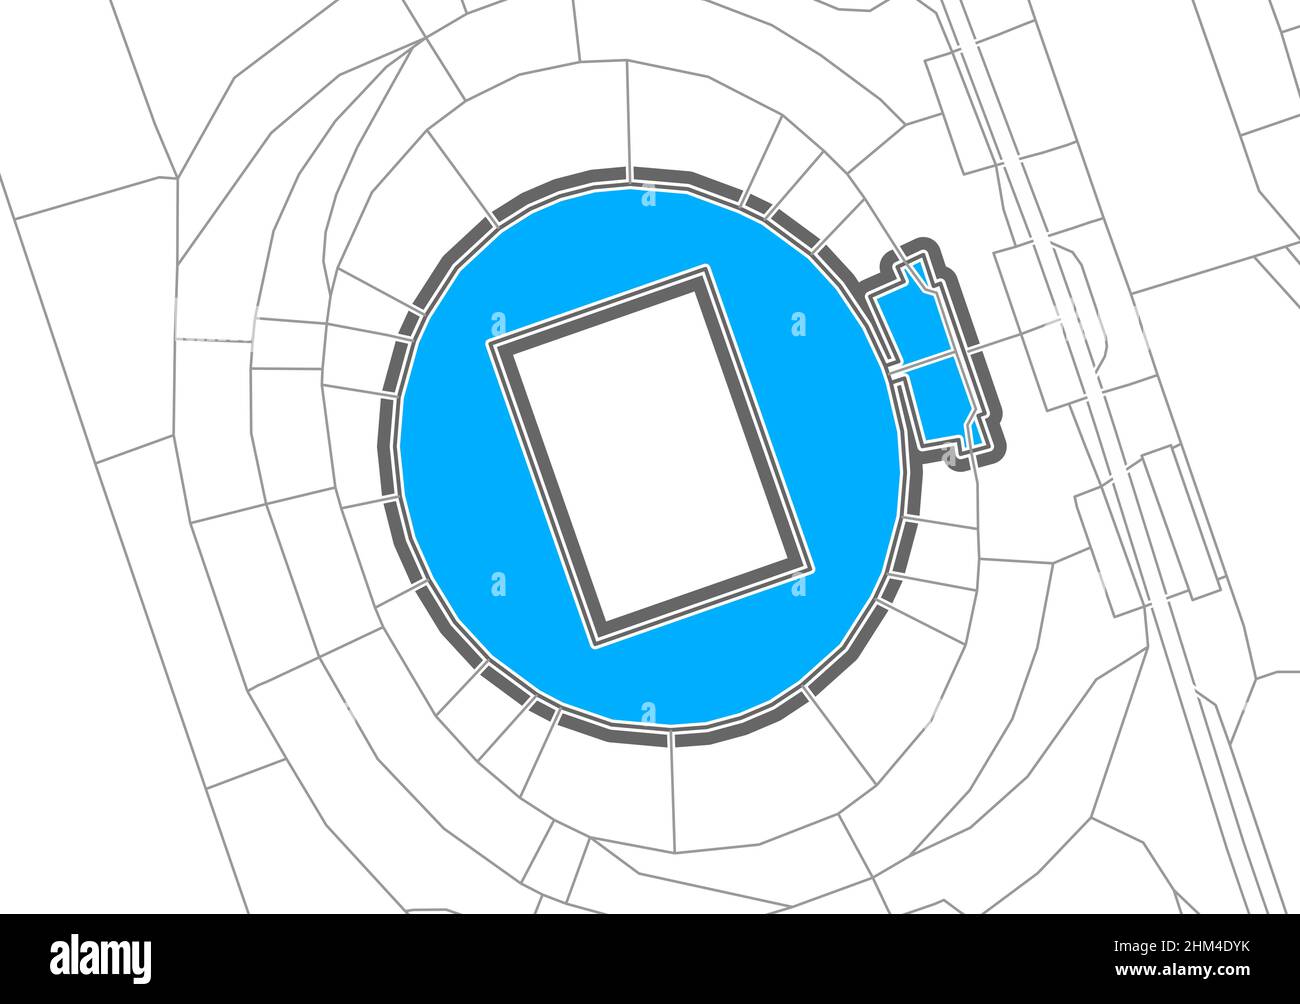 Leipzig, Football Stadium, outline vector map. The bundesliga statium map was drawn with white areas and lines for main roads, side roads. Stock Vector